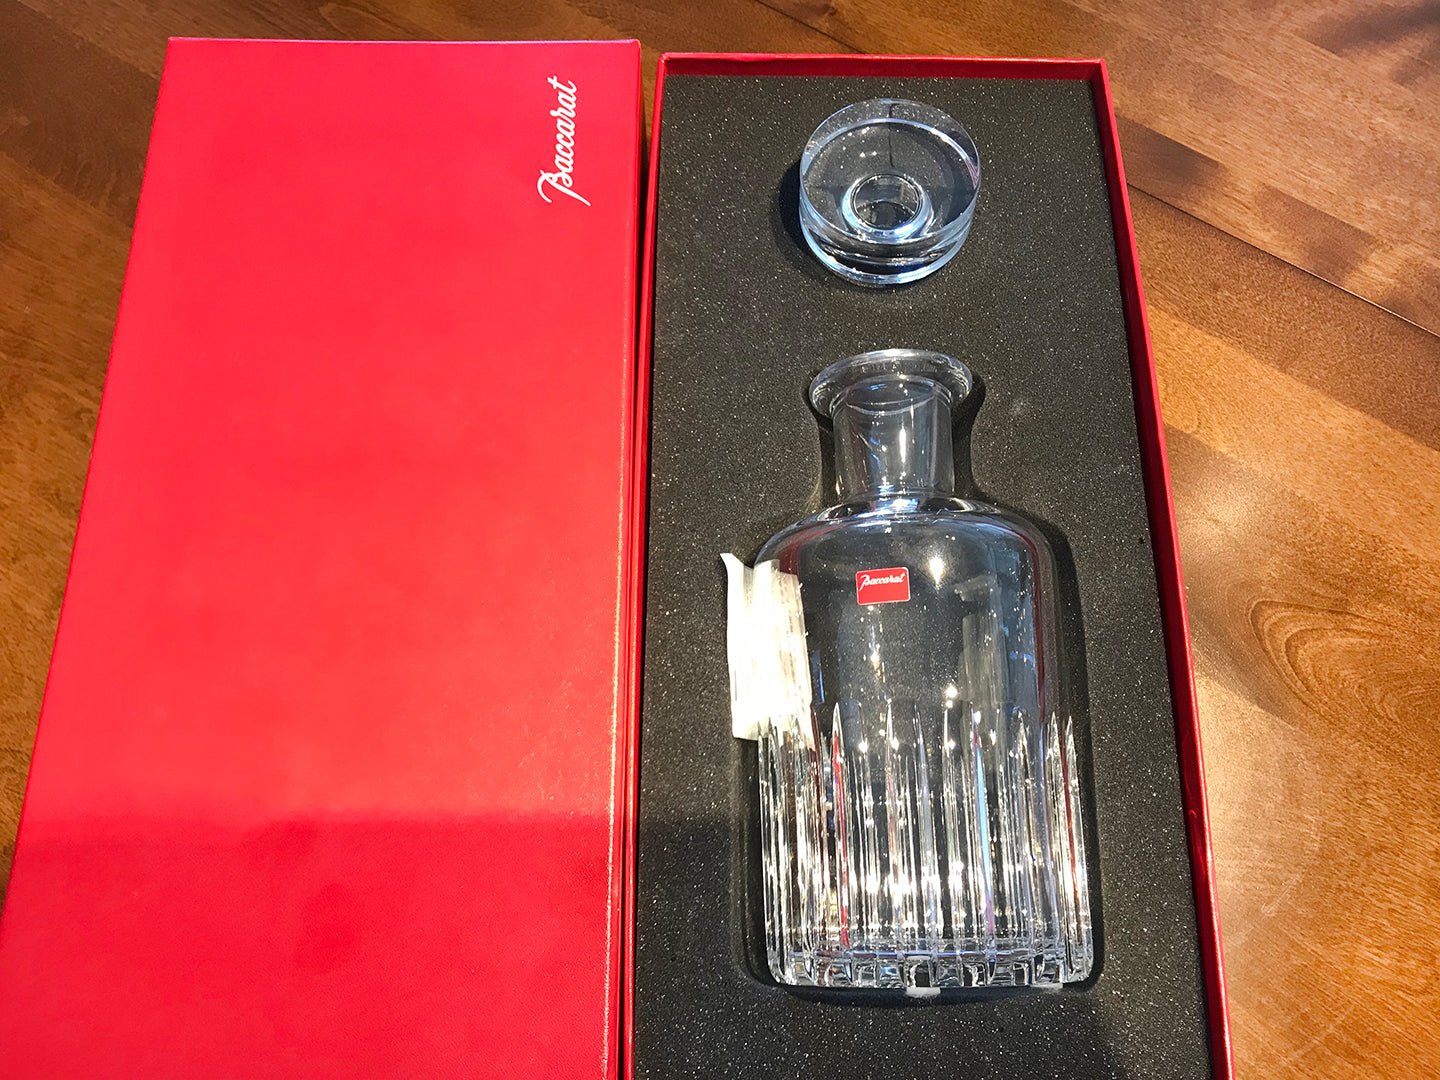 Baccarat Crystal Rotary Pattern Whiskey Decanter / Box